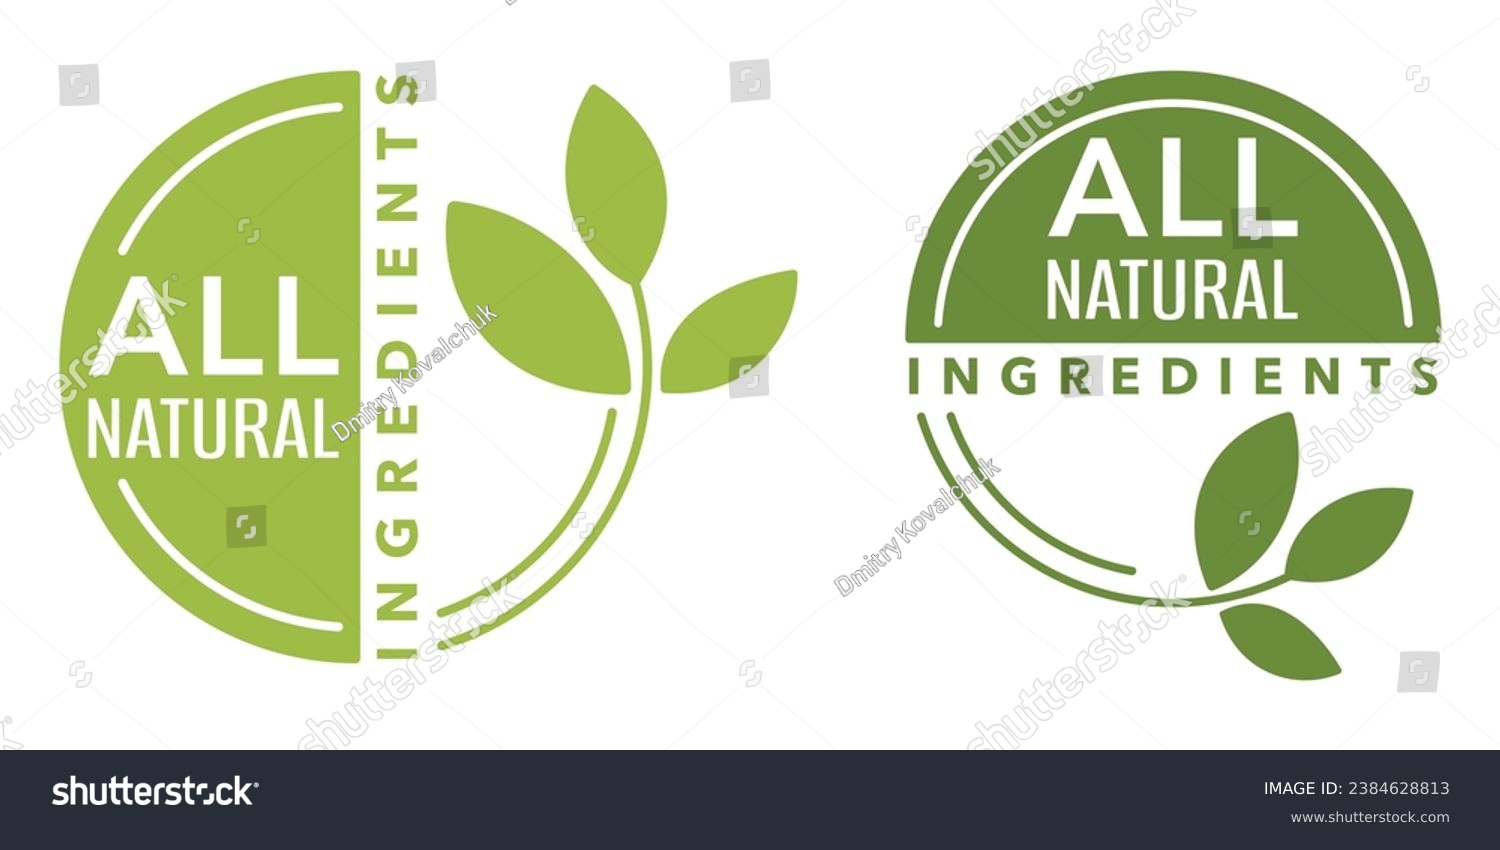 All Natural Ingredients - No Preservatives no artificial Flavors badge - two options in single sticker for healthy products composition. Flat green square pictogram #2384628813